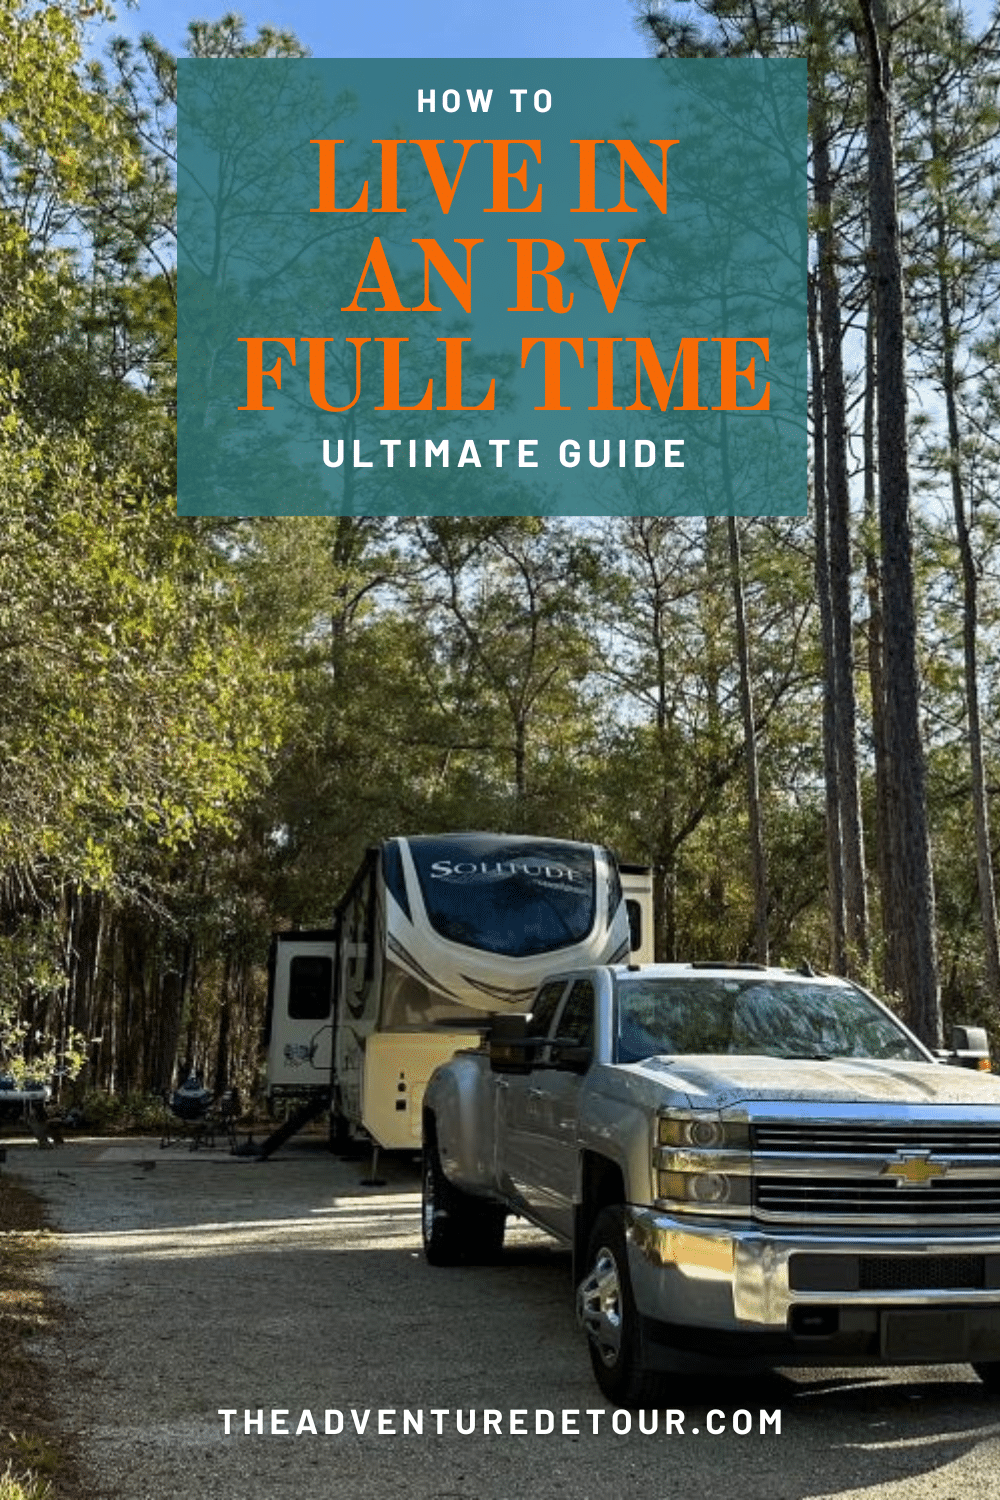 RV camping in a state park - RV living full time